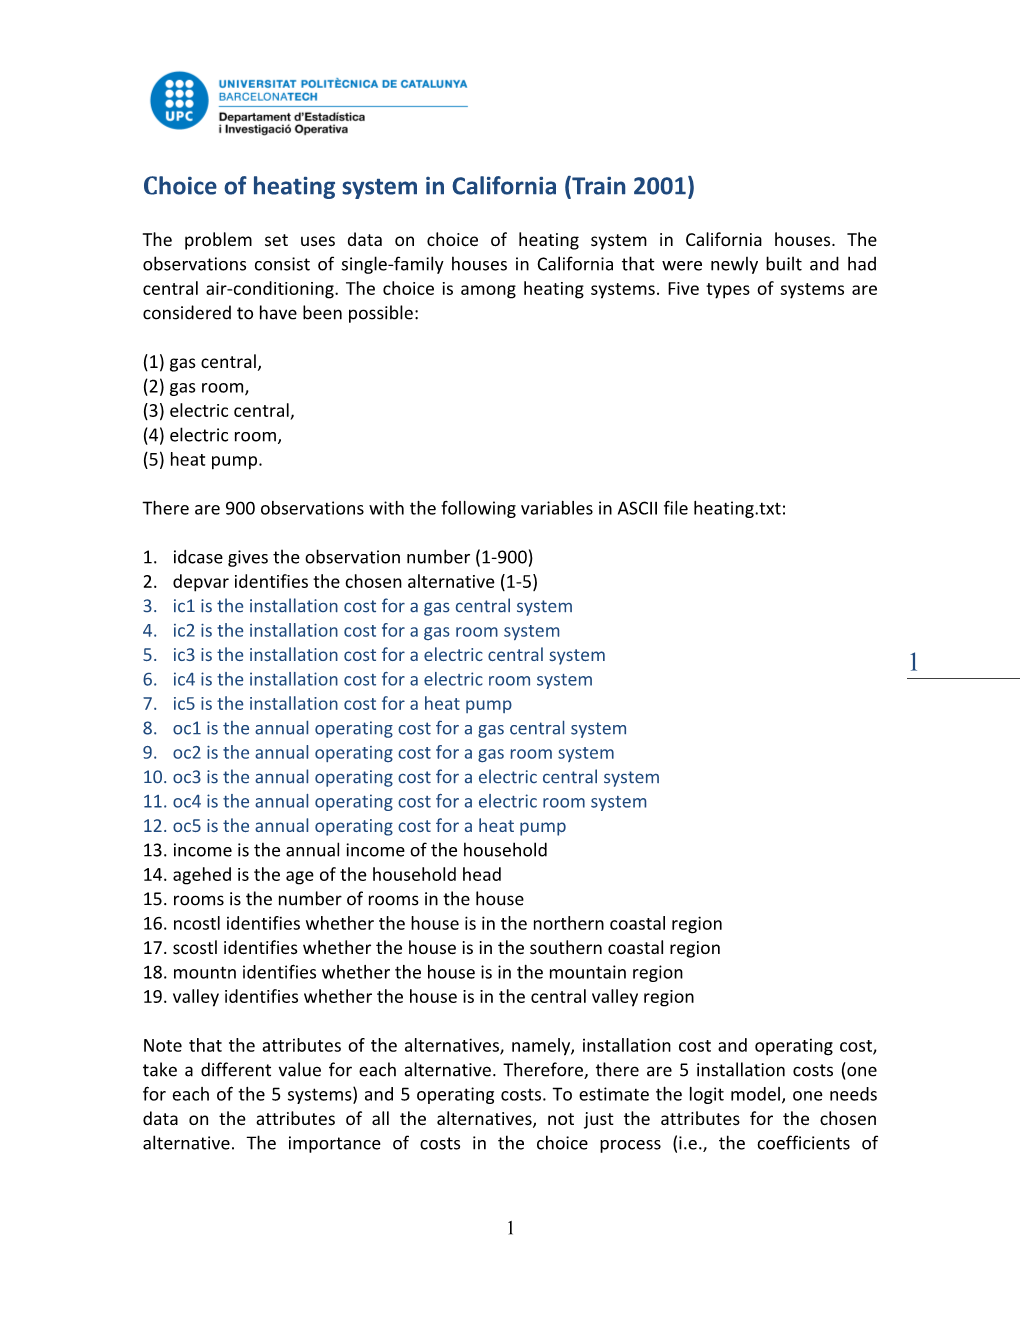 Choice of Heating System in California (Train 2001)